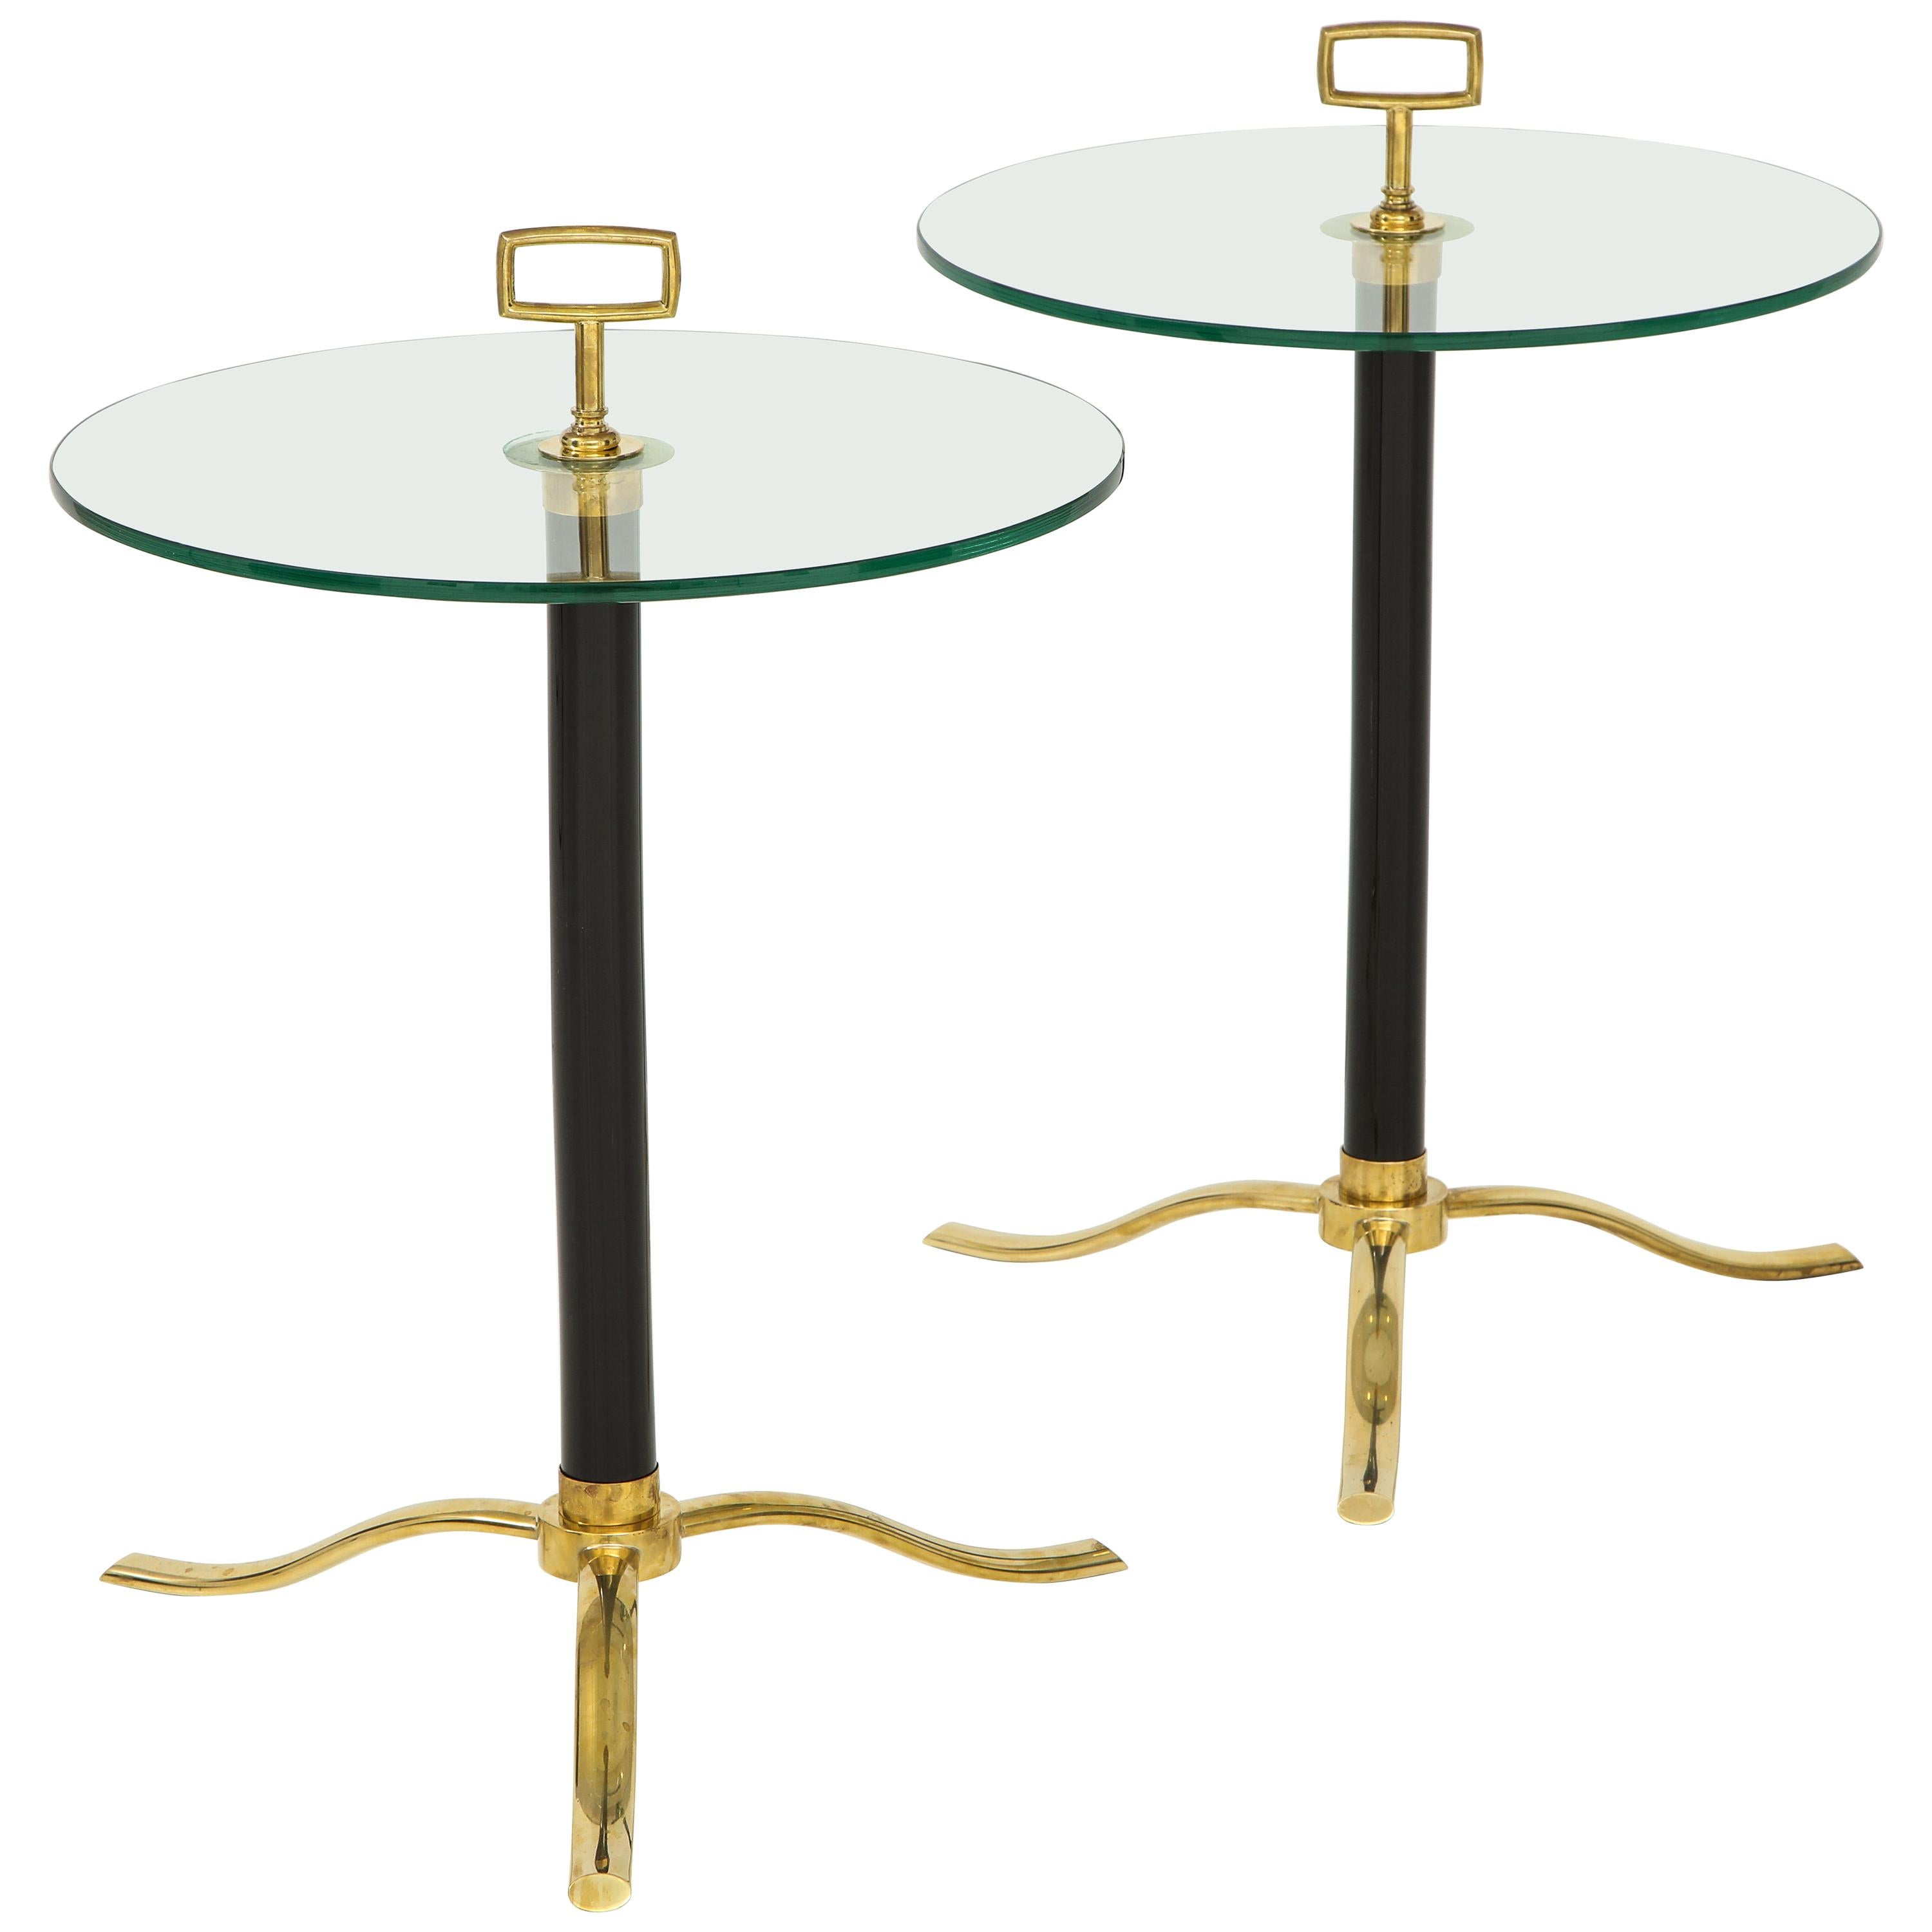 Pair of Black Tripod Side or End Tables in Murano Glass and Brass